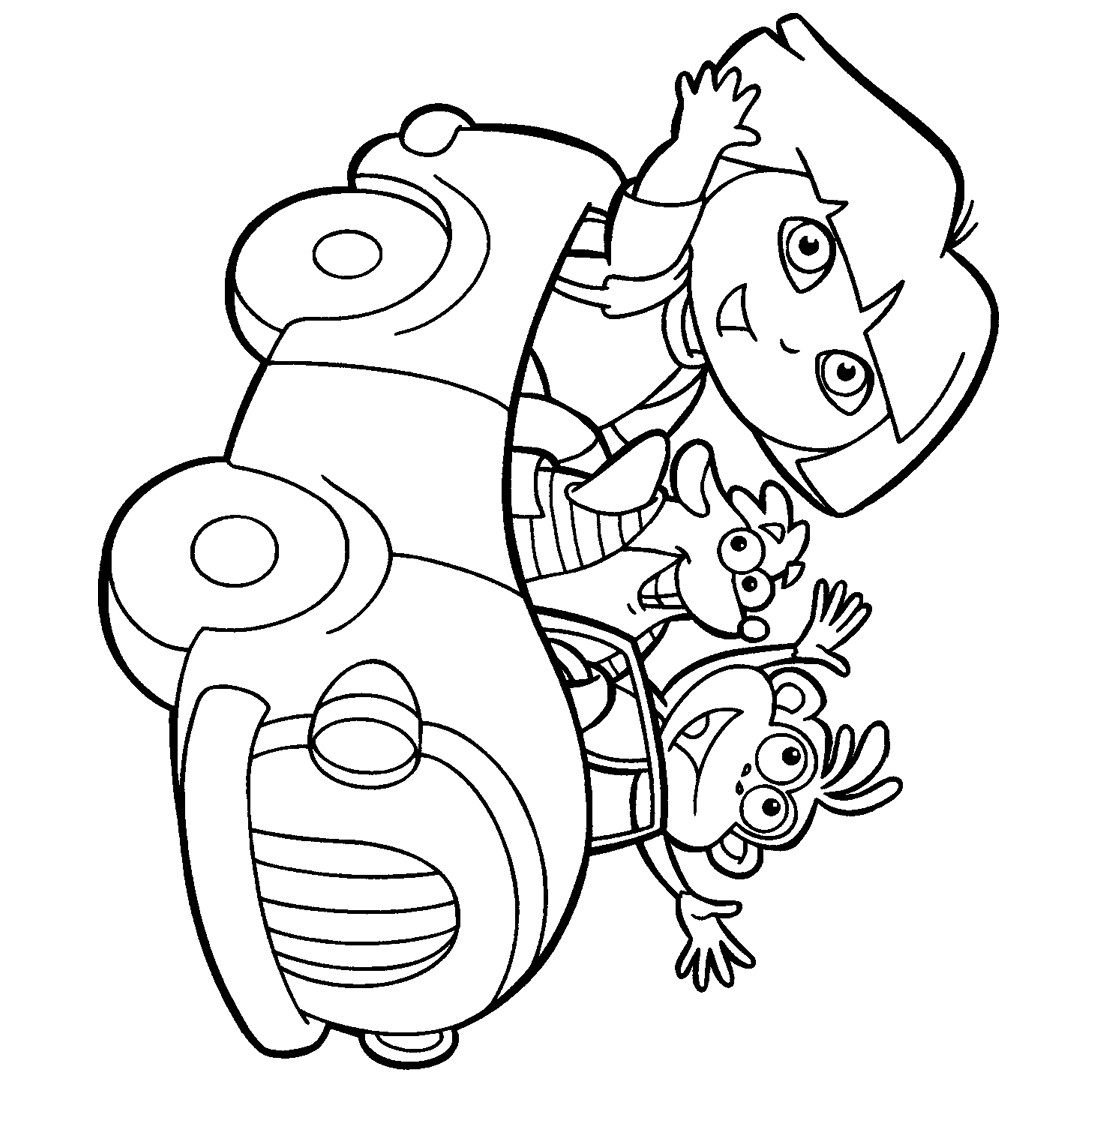 Printable Coloring Books For Kids
 Printable coloring pages for kids